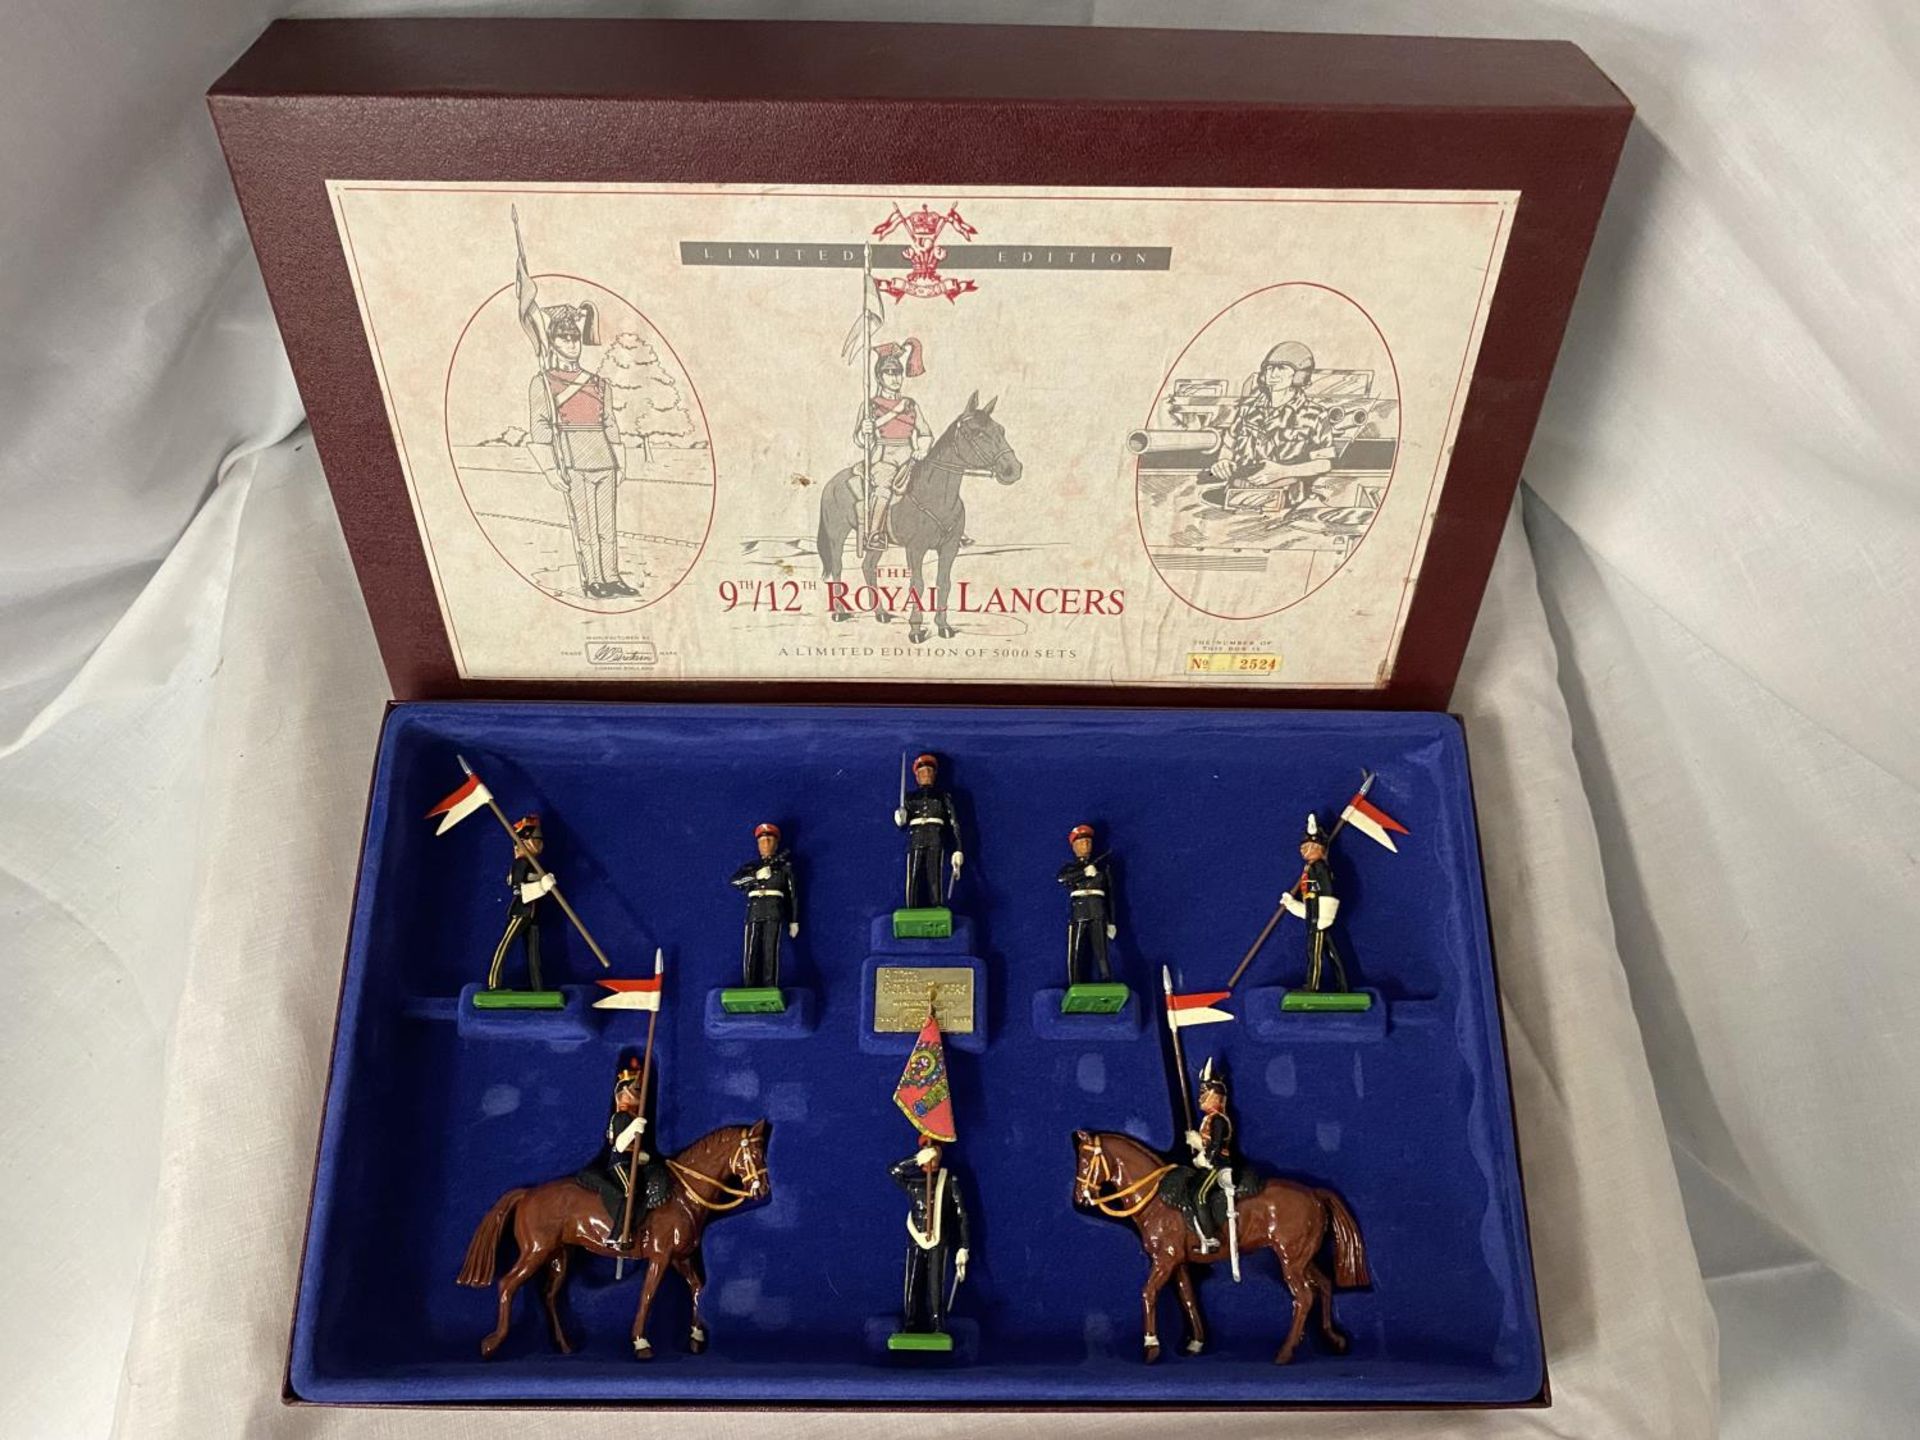 A BOXED BRITIANS THE 9TH/12TH LANCERS TEN PIECE MODEL SOLDIER SET - NUMBER 5392 - LIMITED EDITION